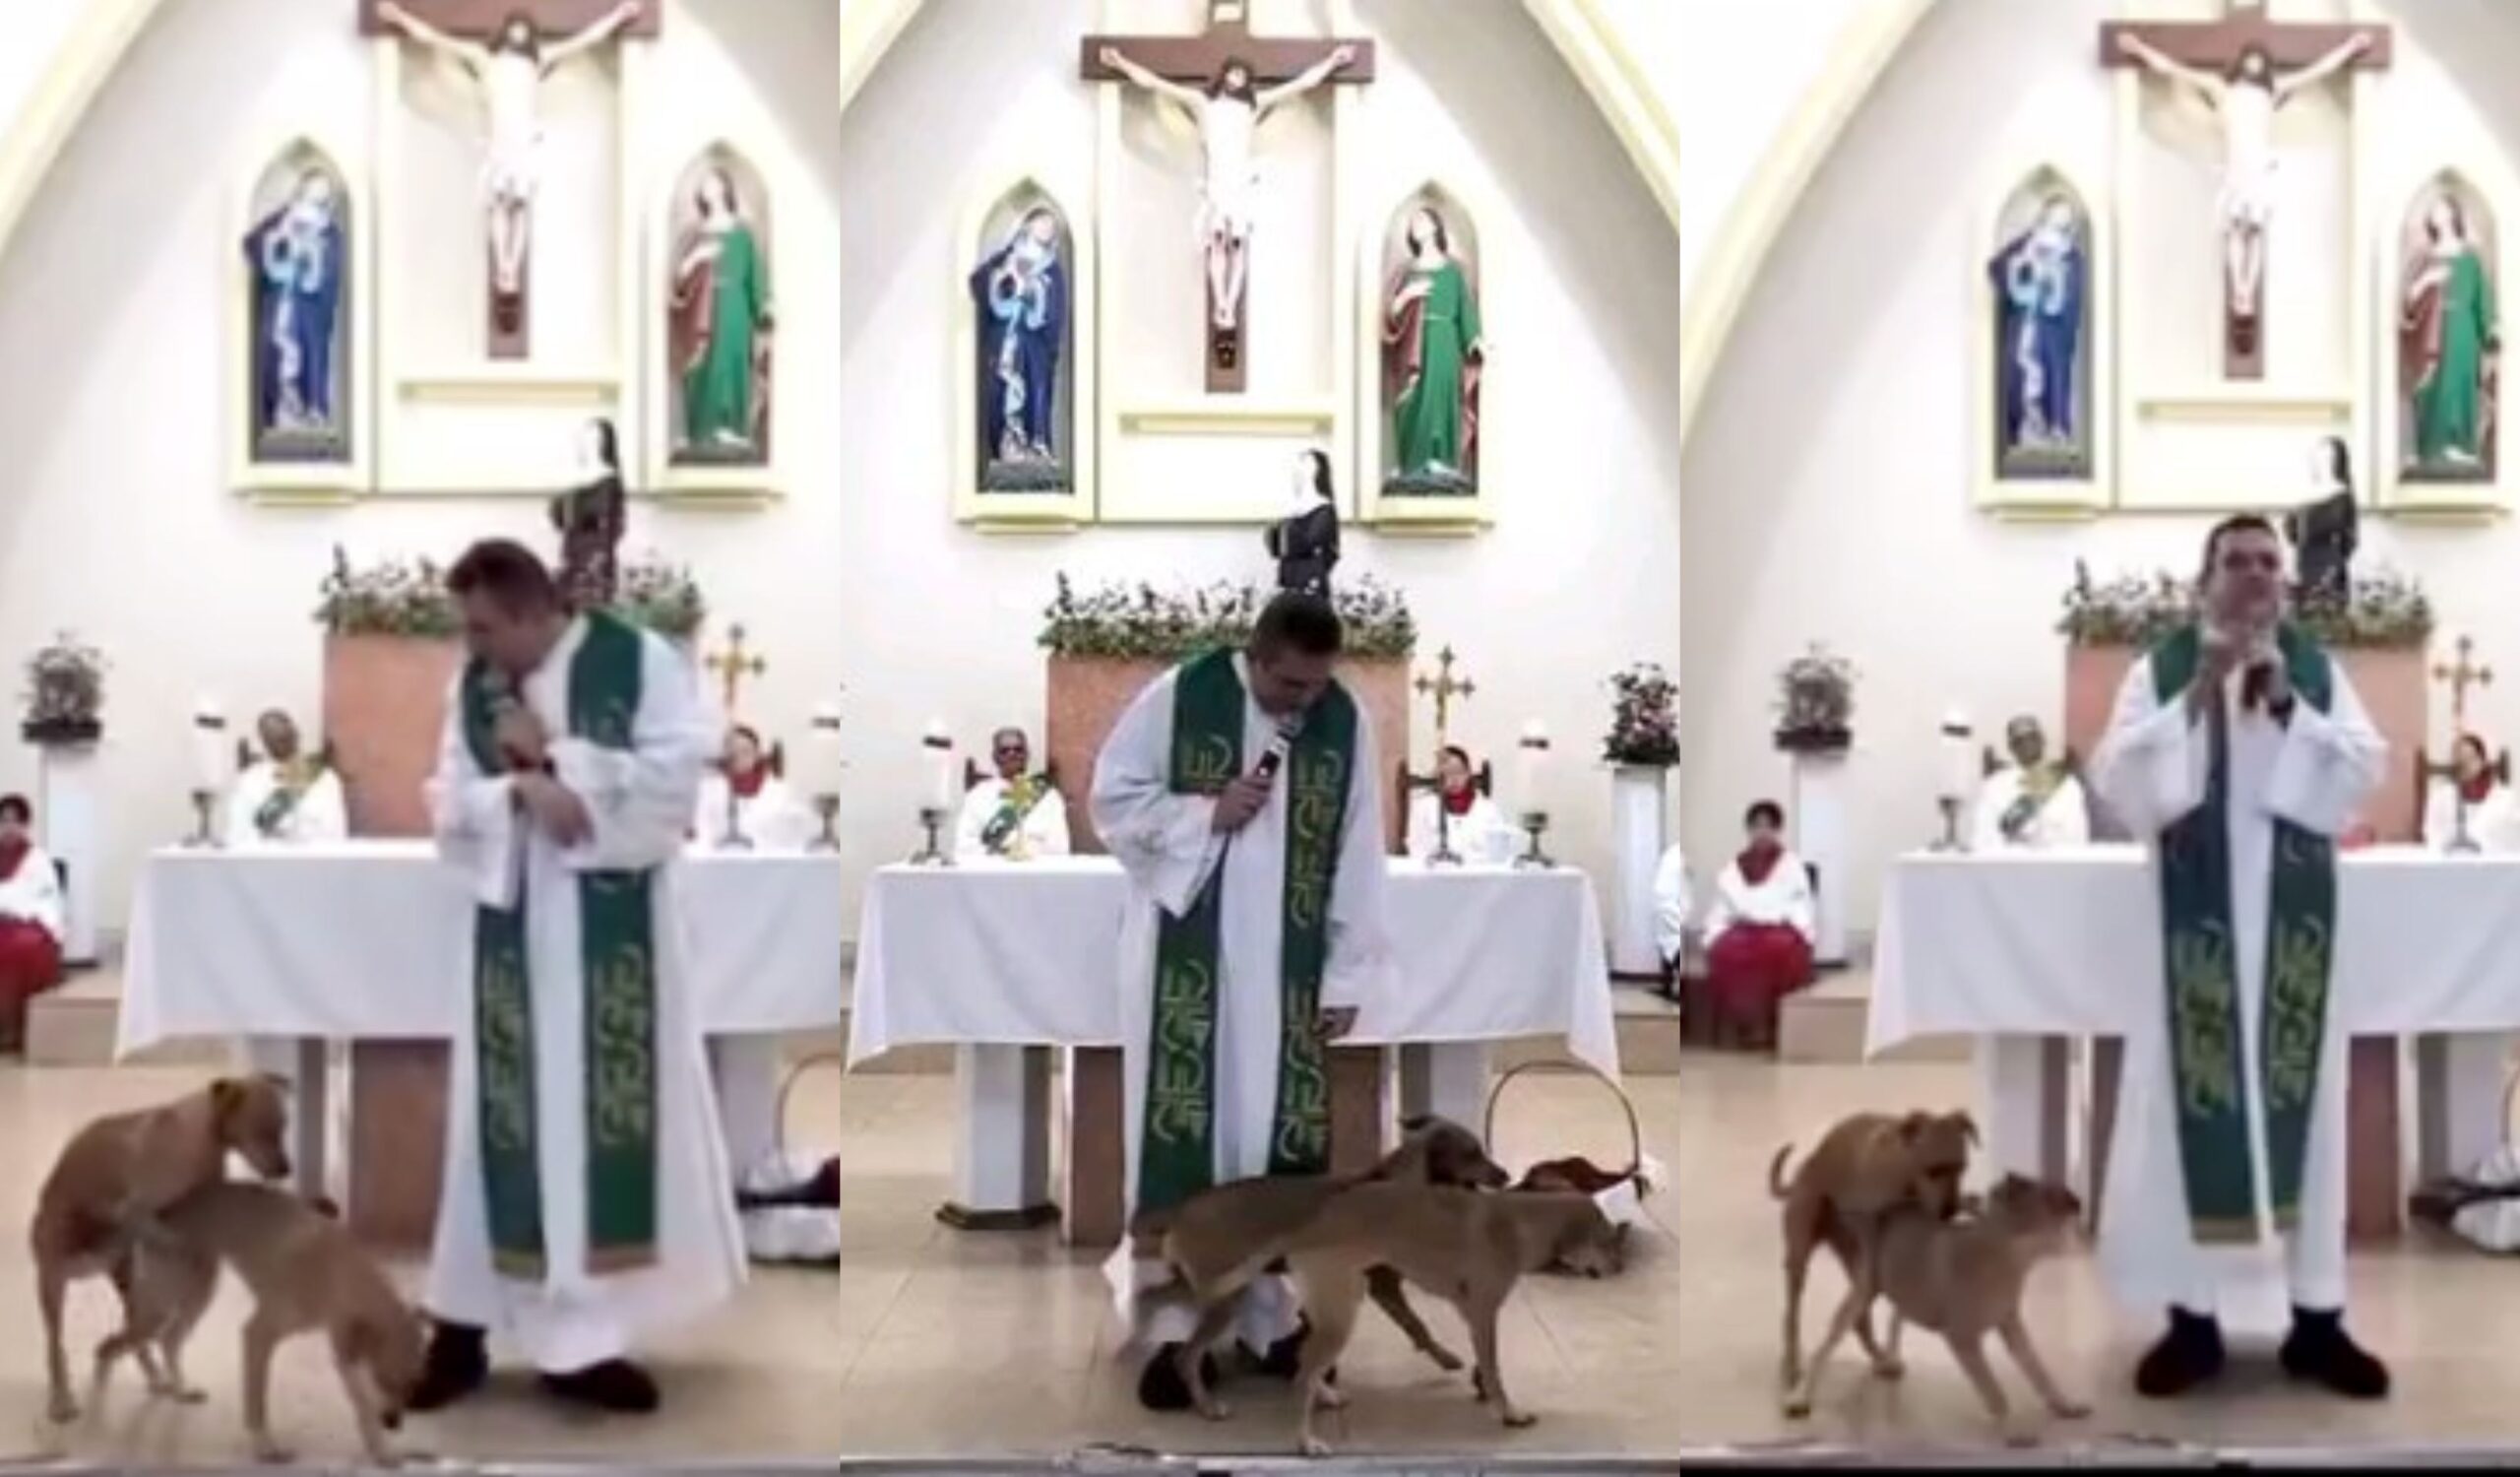 Moment Two Stray dogs Interrupted Pastor during Preaching in Church Service (Video)